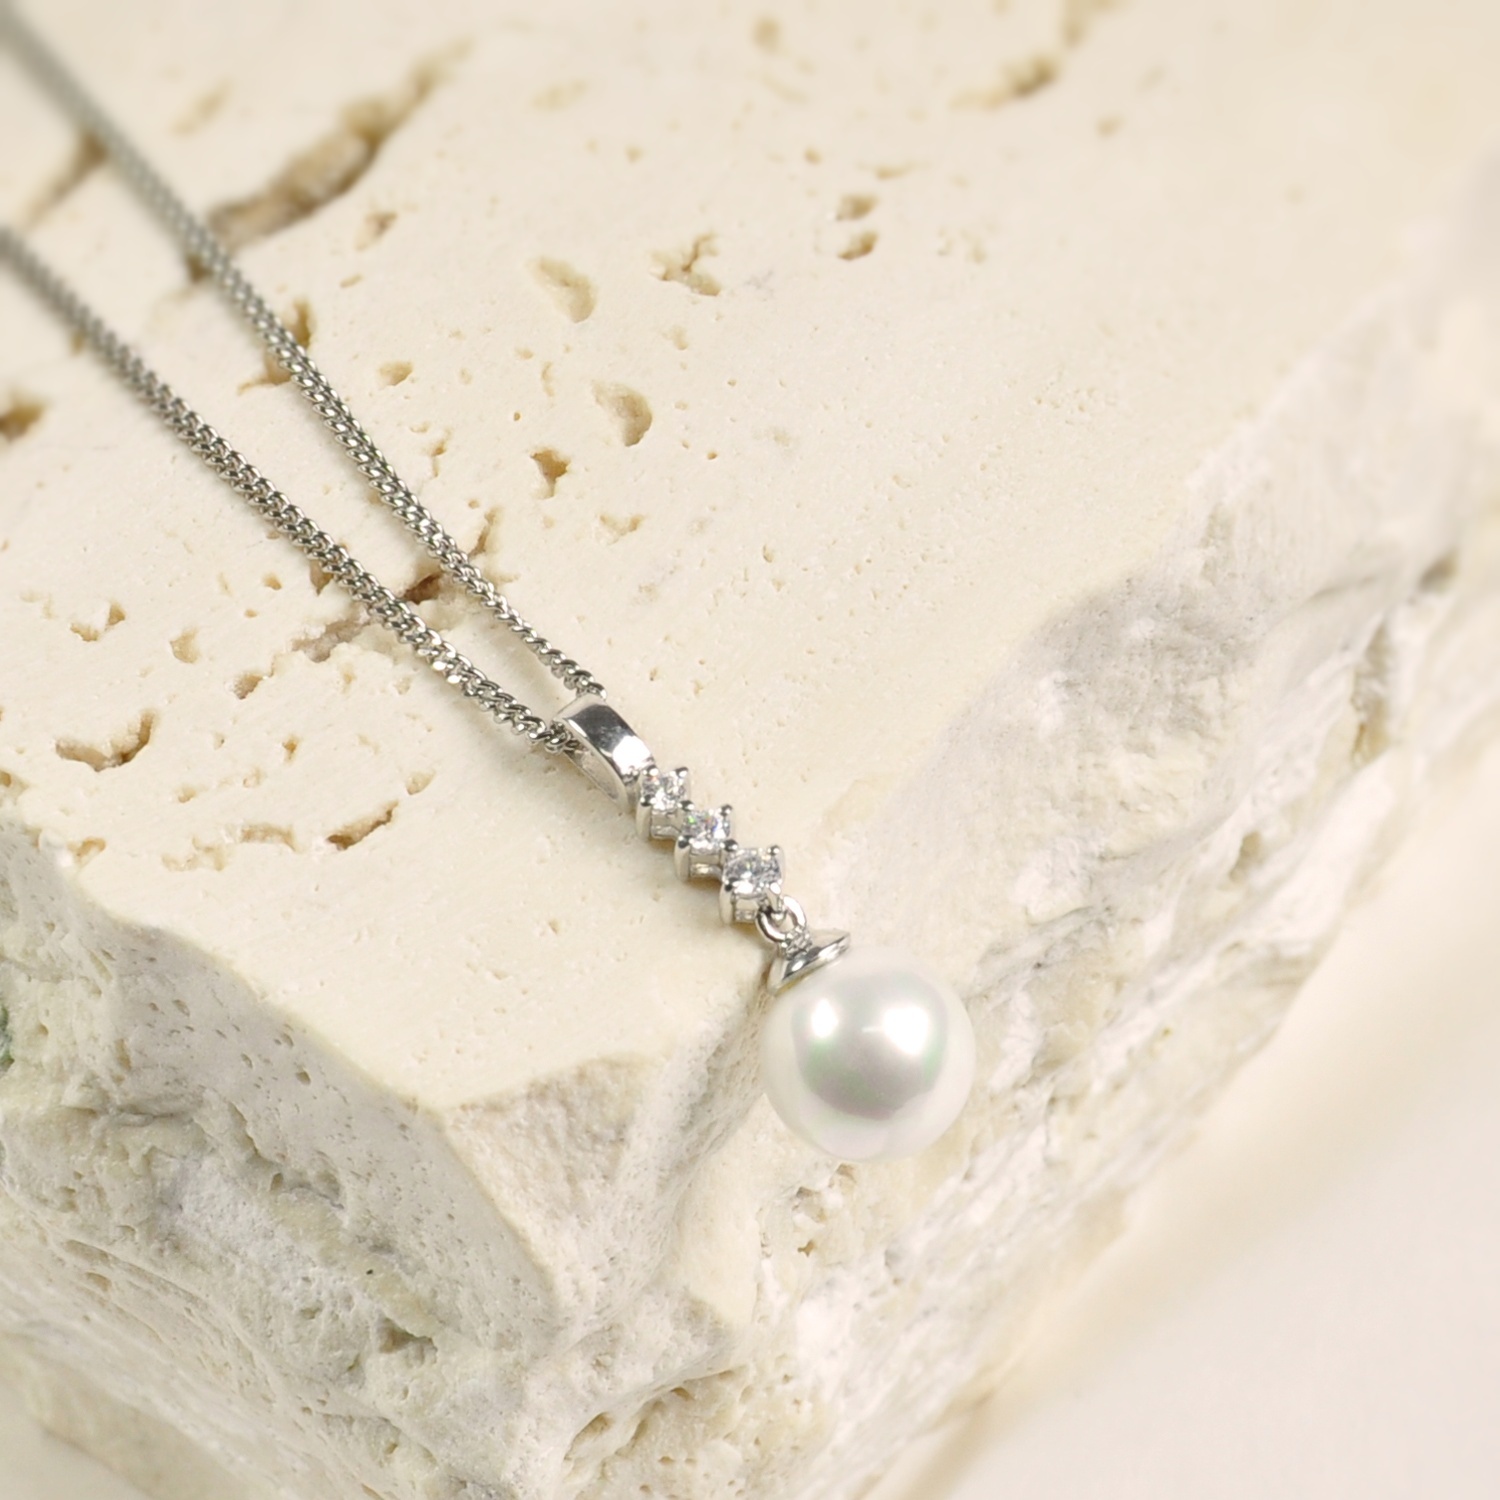 Silver Pendant with a 9 mm. White Pearl and Zircons on a 45 cm. Chain 1